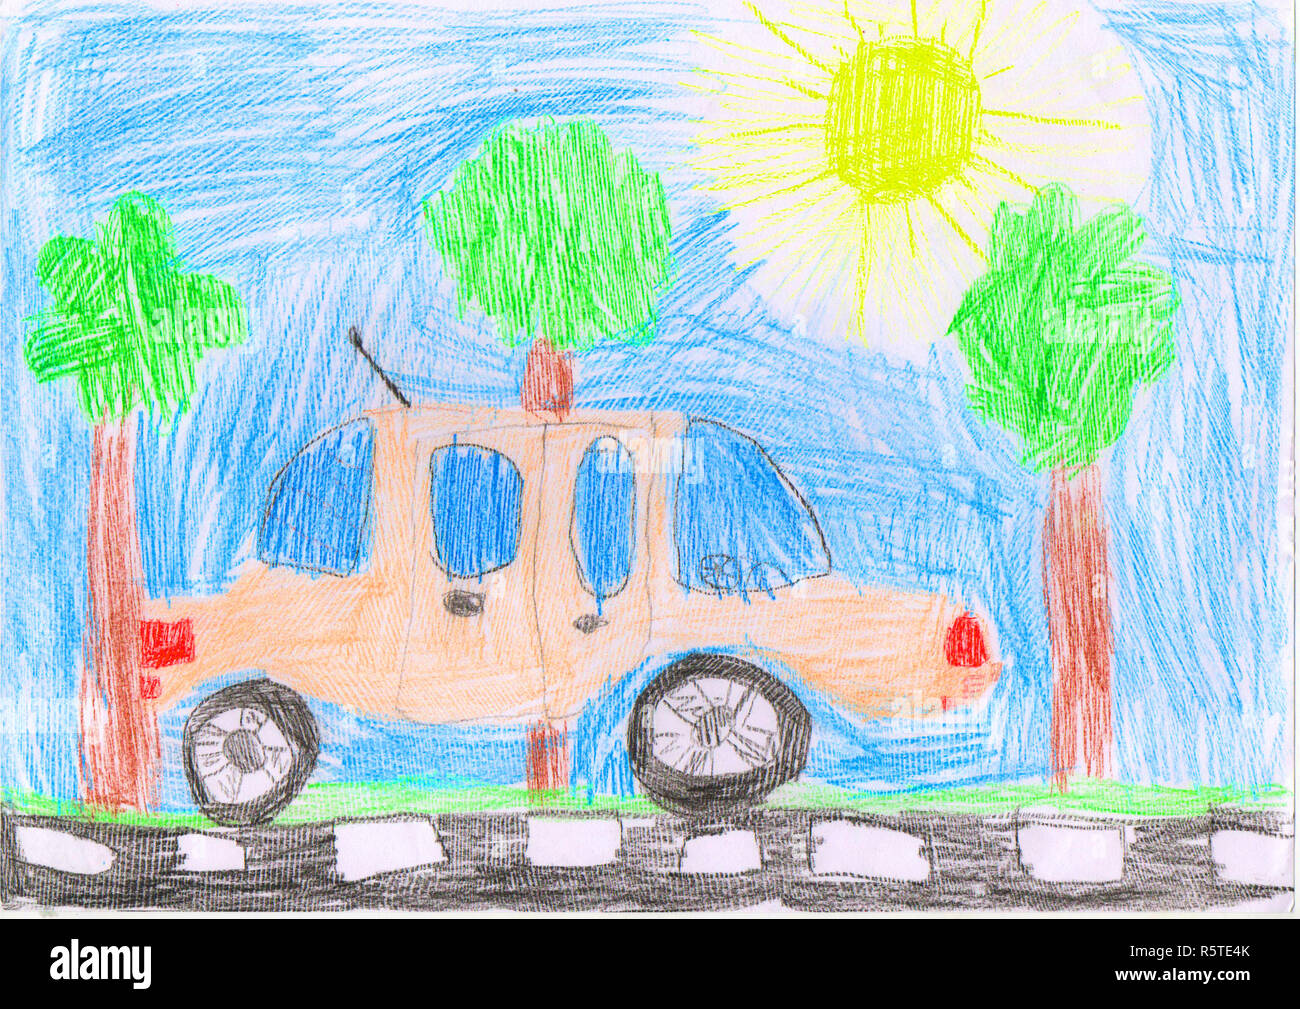 Pink car on the road, trees, child's drawing Stock Photo